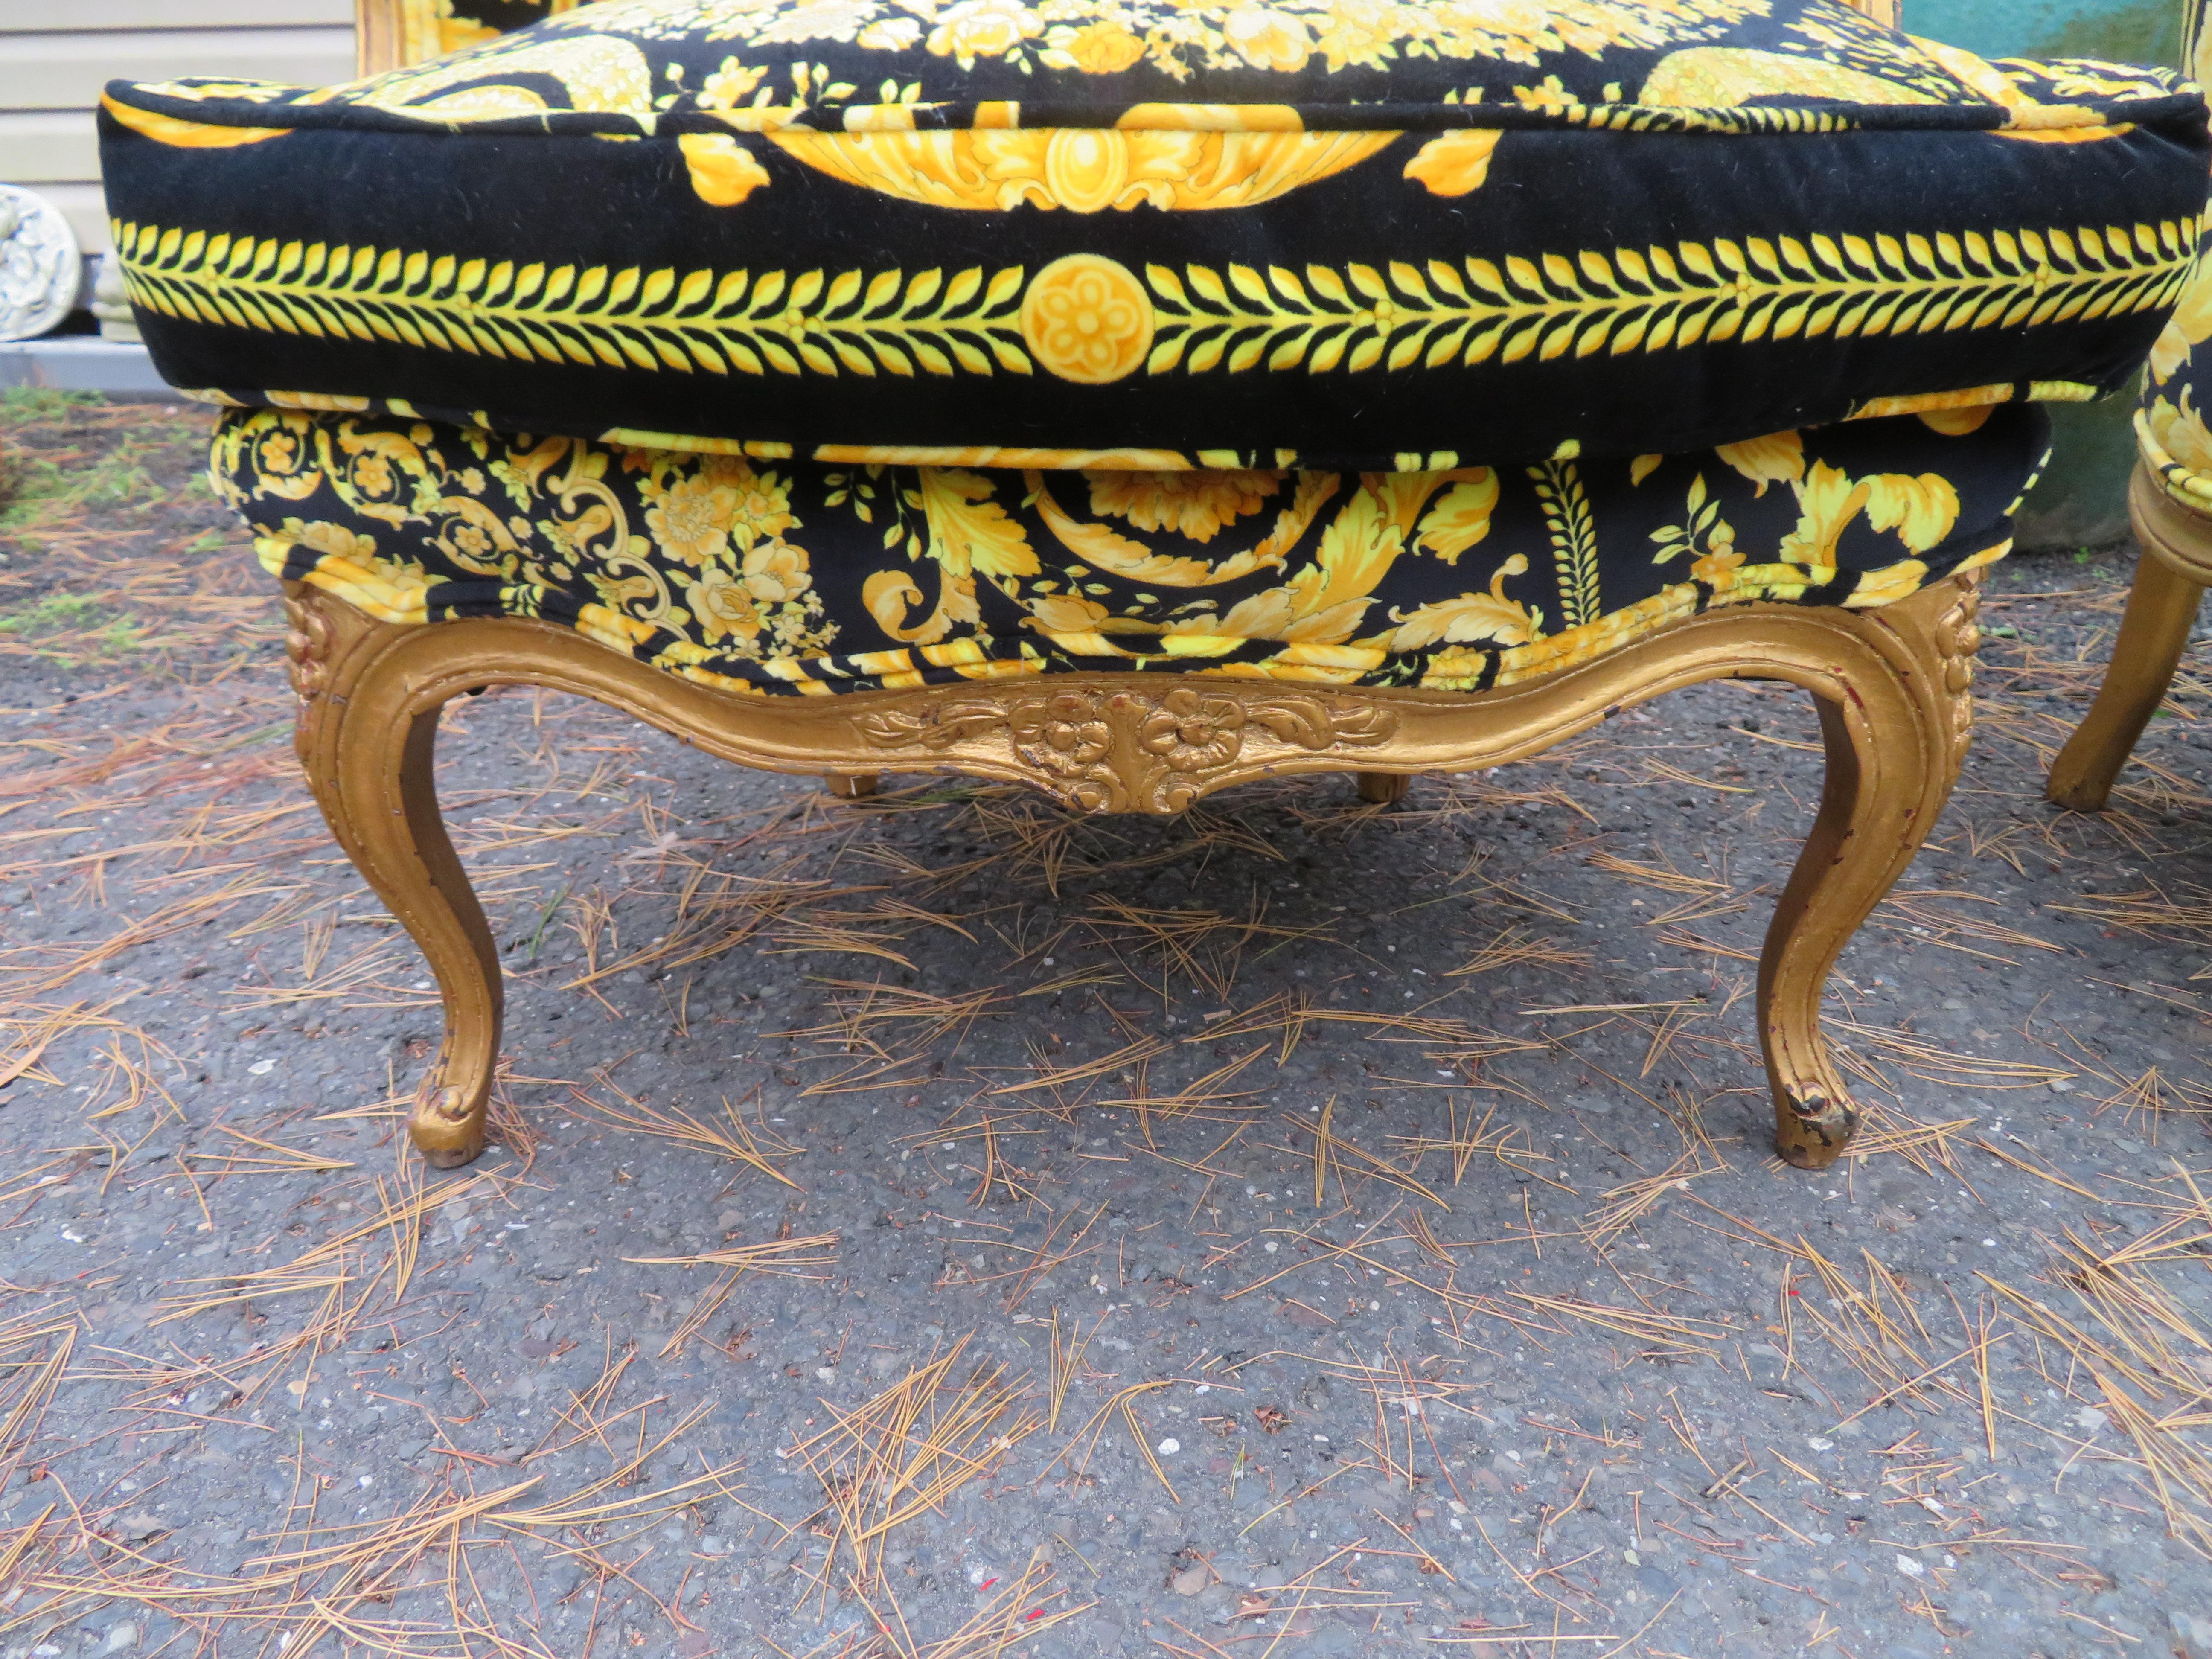 Magnificent Pair French Louis 15th Style Carved Chairs Custom Versace Fabric In Good Condition For Sale In Pemberton, NJ